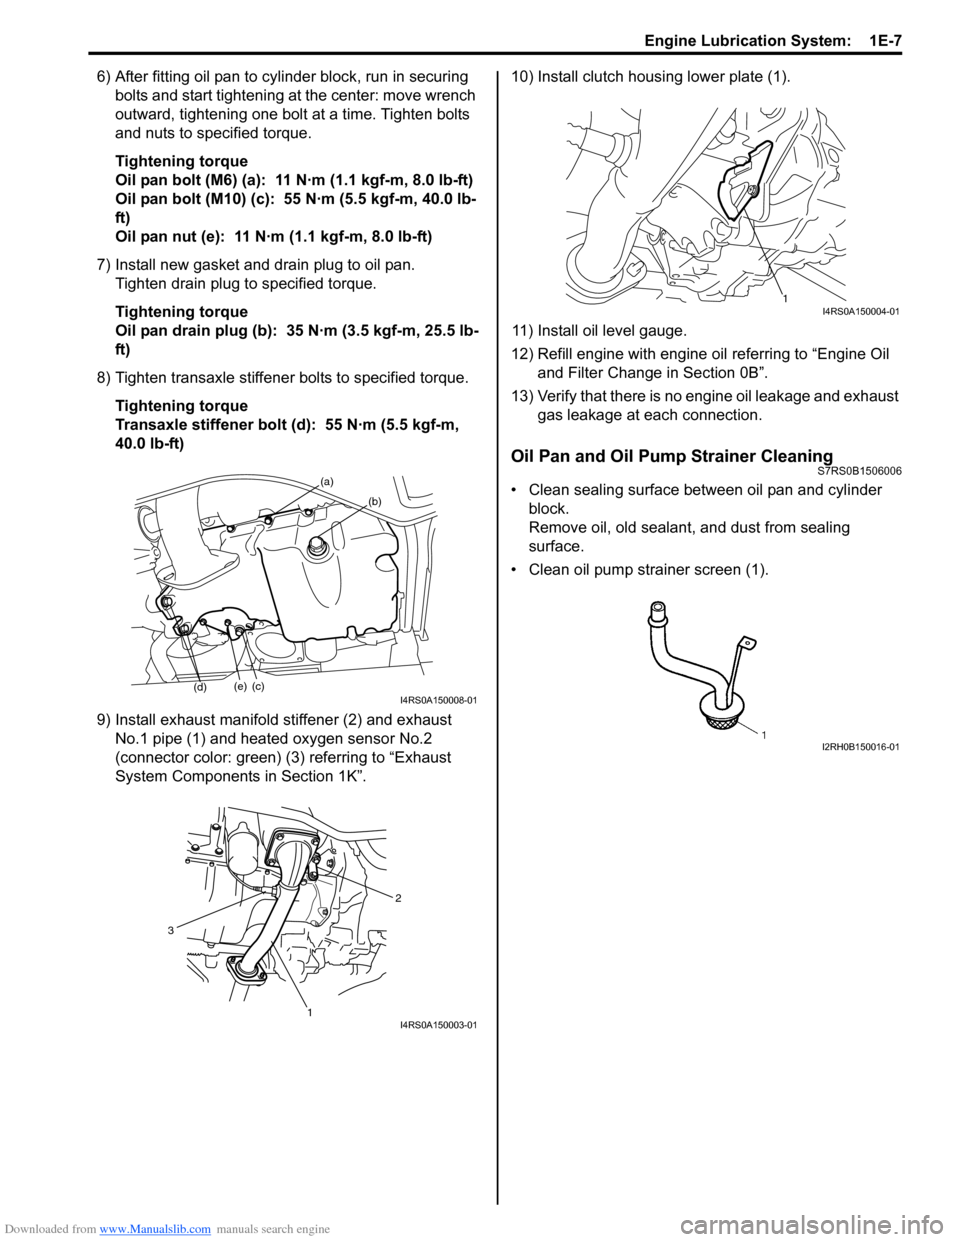 SUZUKI SWIFT 2007 2.G Service Owners Manual Downloaded from www.Manualslib.com manuals search engine Engine Lubrication System:  1E-7
6) After fitting oil pan to cylinder block, run in securing bolts and start tightening at the center: move wre